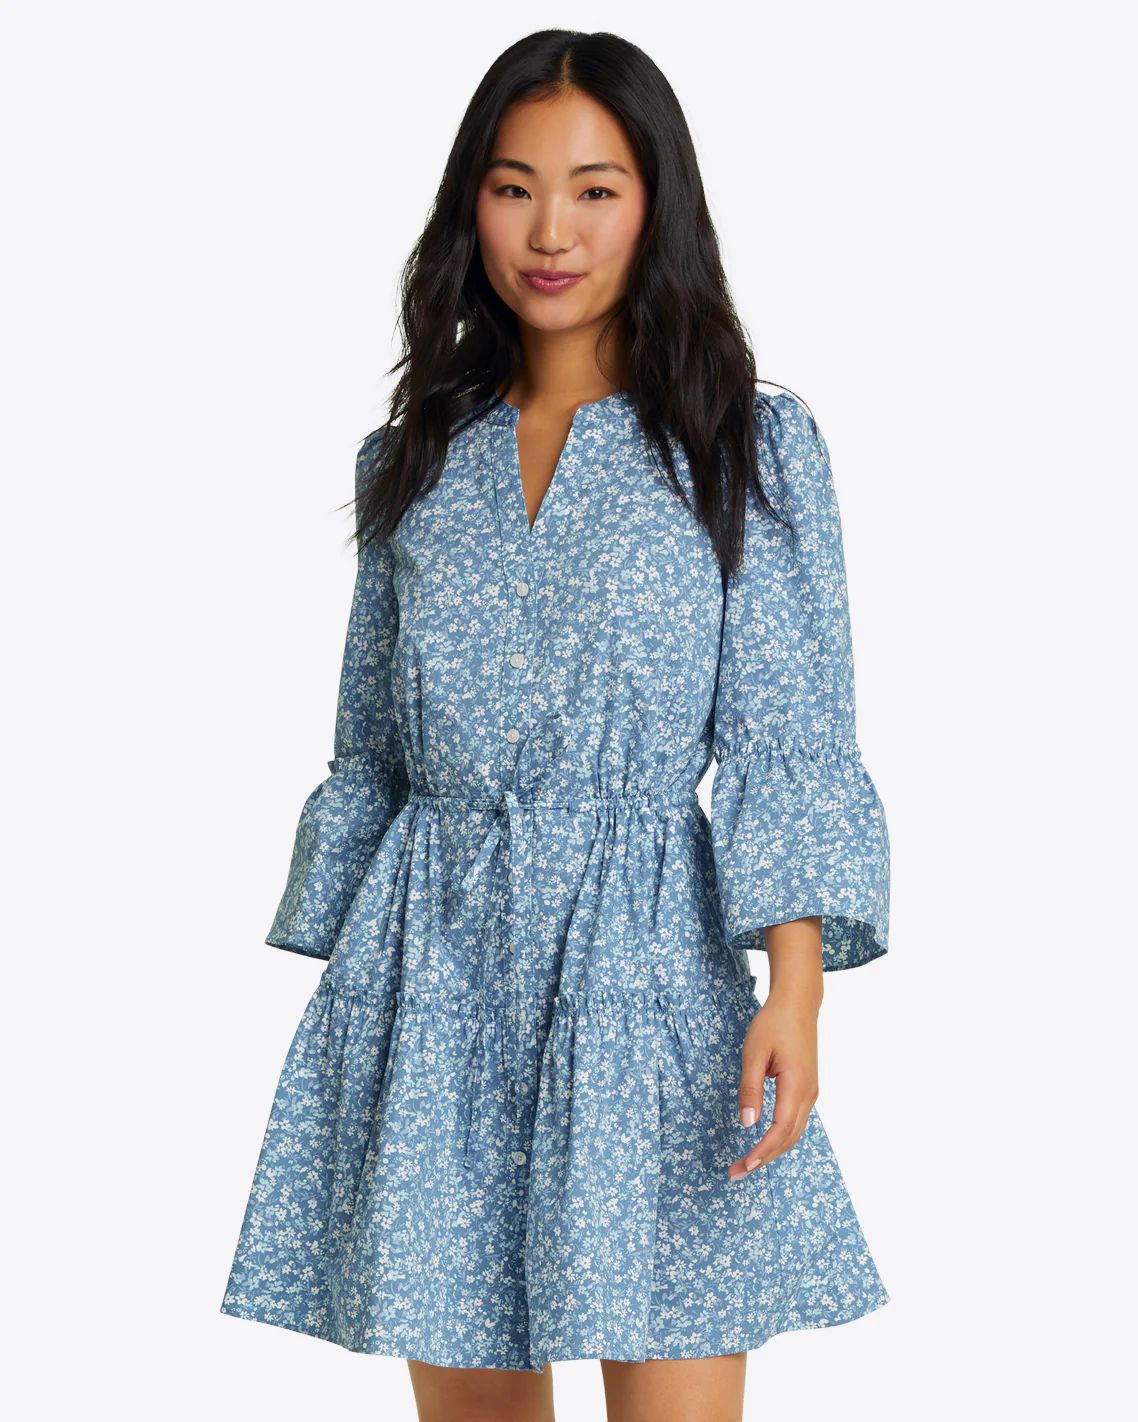 Avery Shirtdress in Bluebell Floral | Draper James (US)